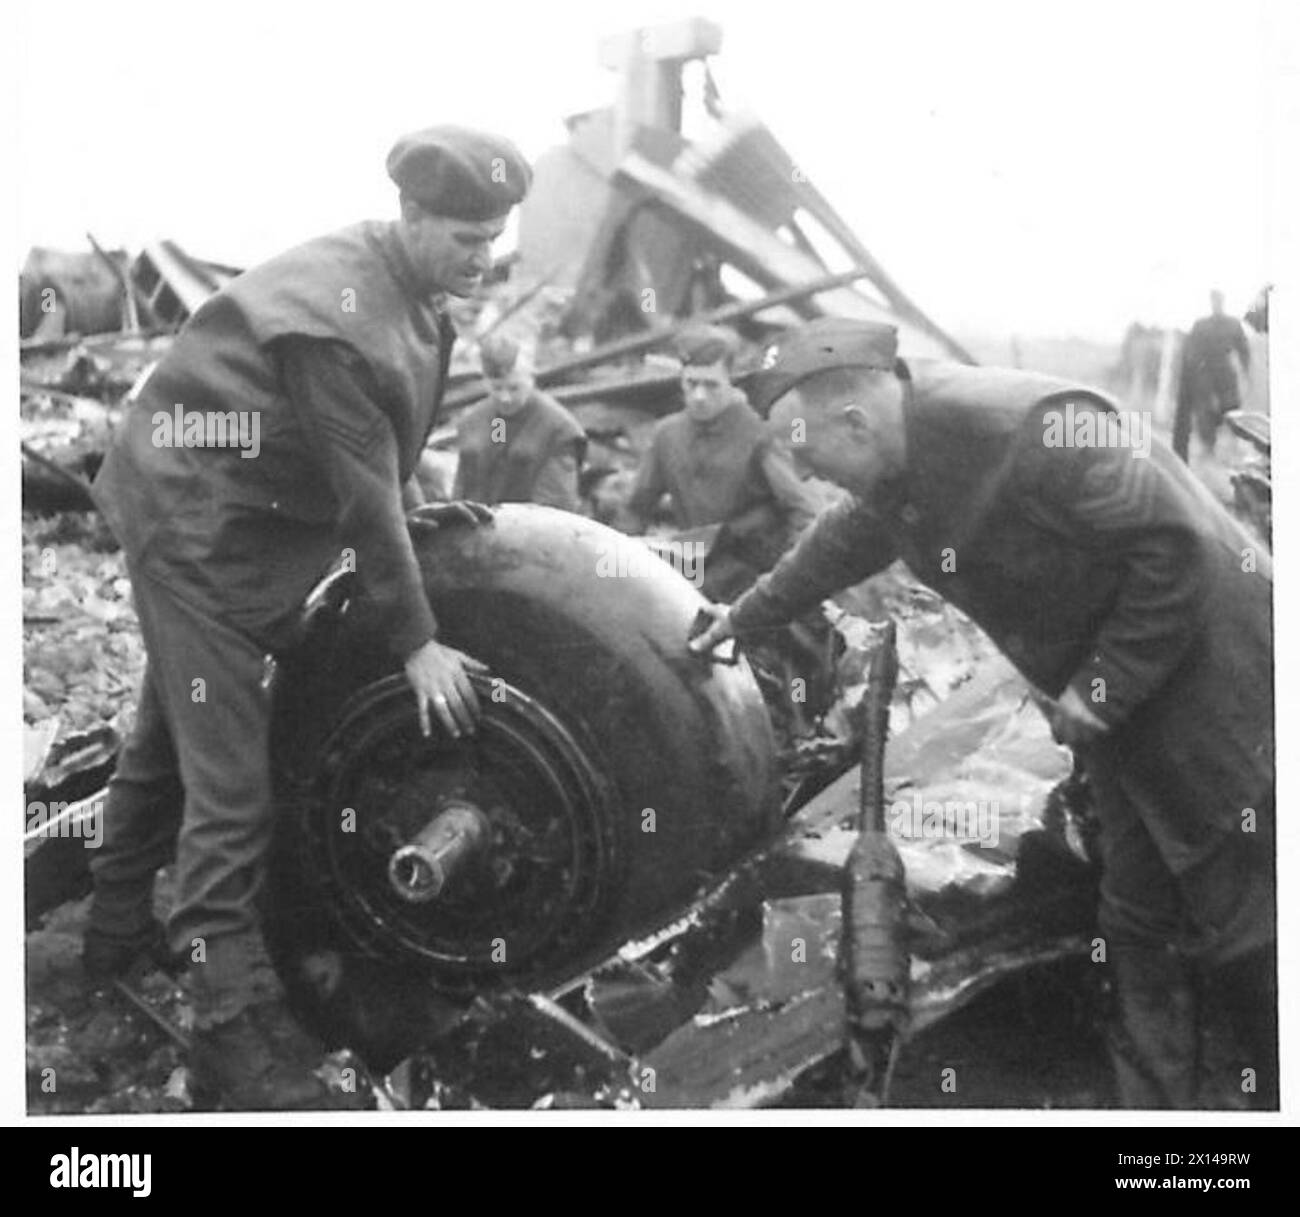 ACK-ACK GUNNERS DESTROY RAIDER - Gunners examining the wreckage of a German raider destroyed by A.A.fire British Army Stock Photo